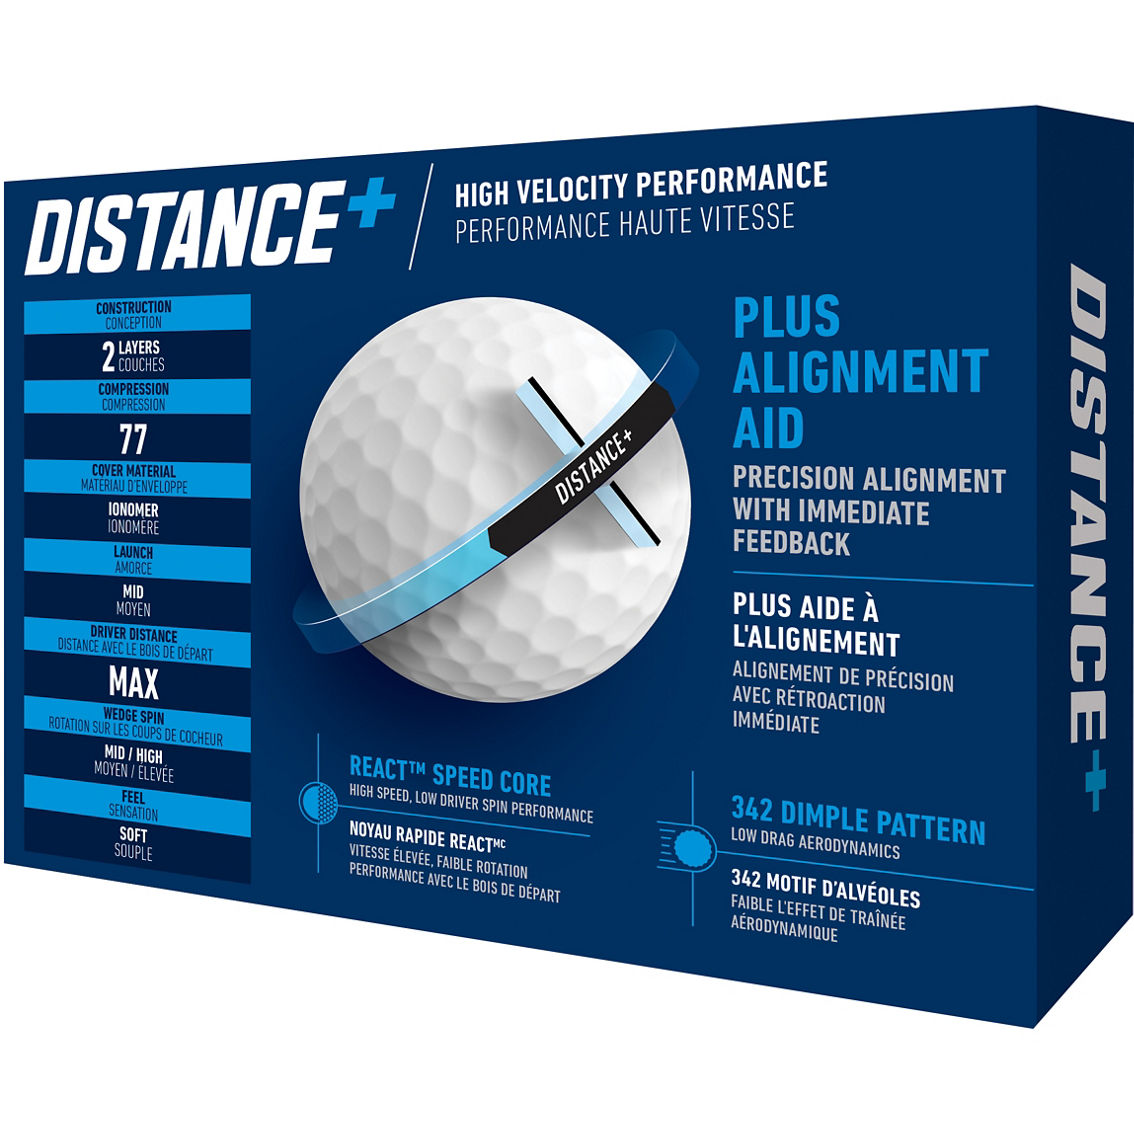 Taylormade Distance+ Golf Ball 12 ct. - Image 2 of 5